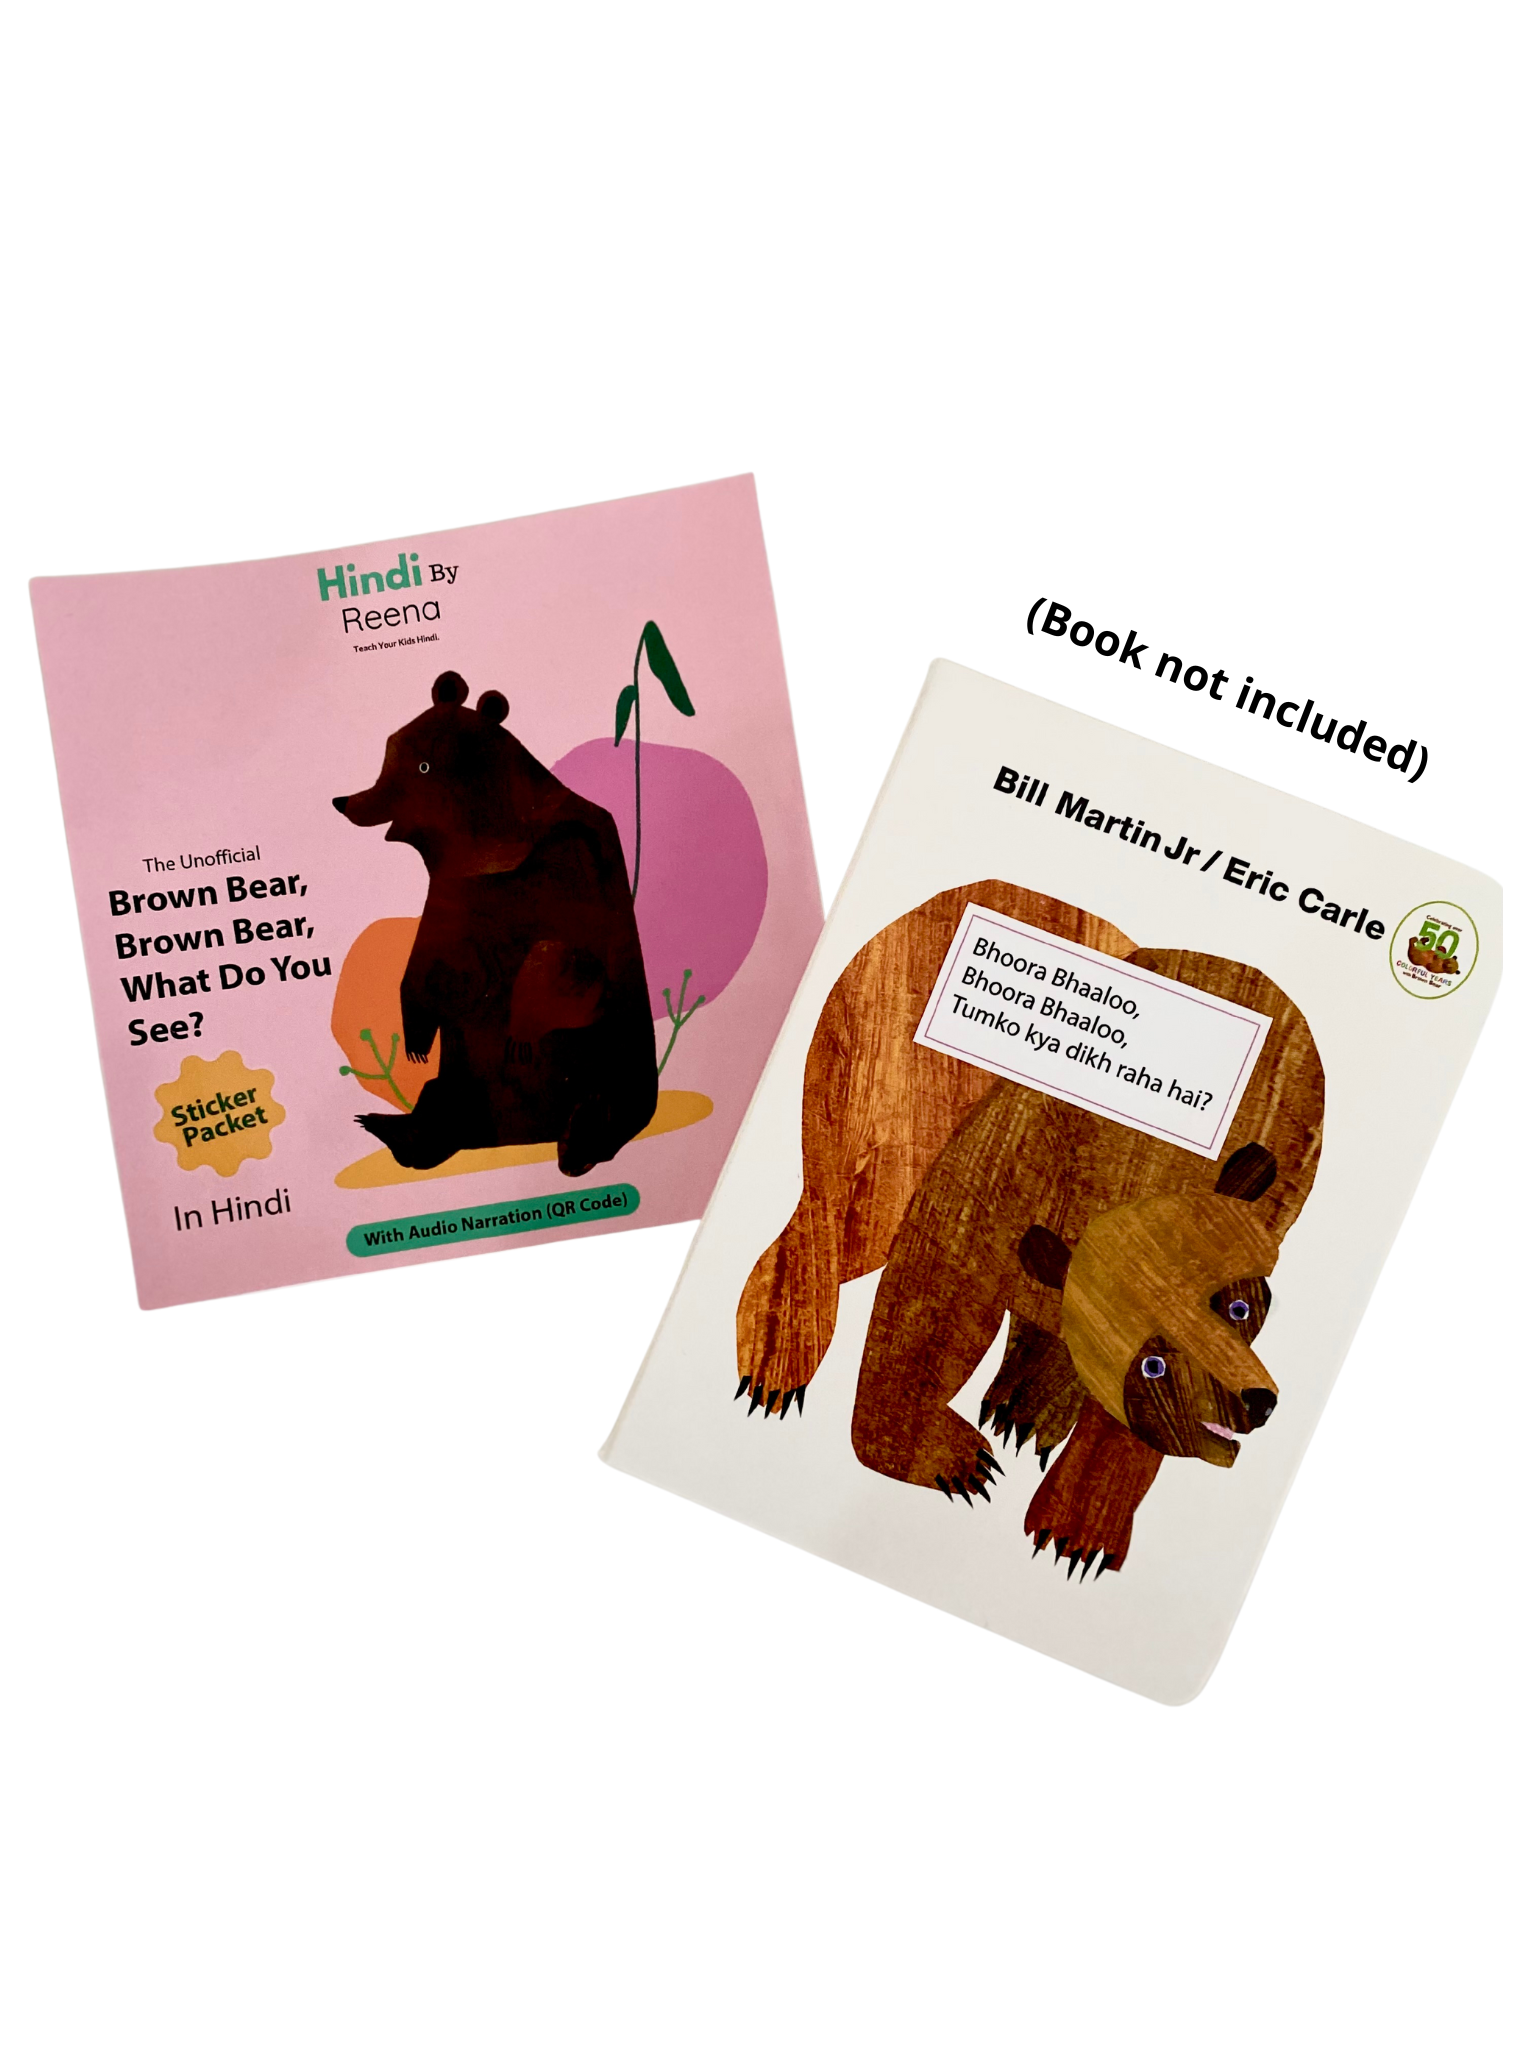 The Unofficial "brown Bear, Brown Bear" Hindi Sticker Packet (with Audio)